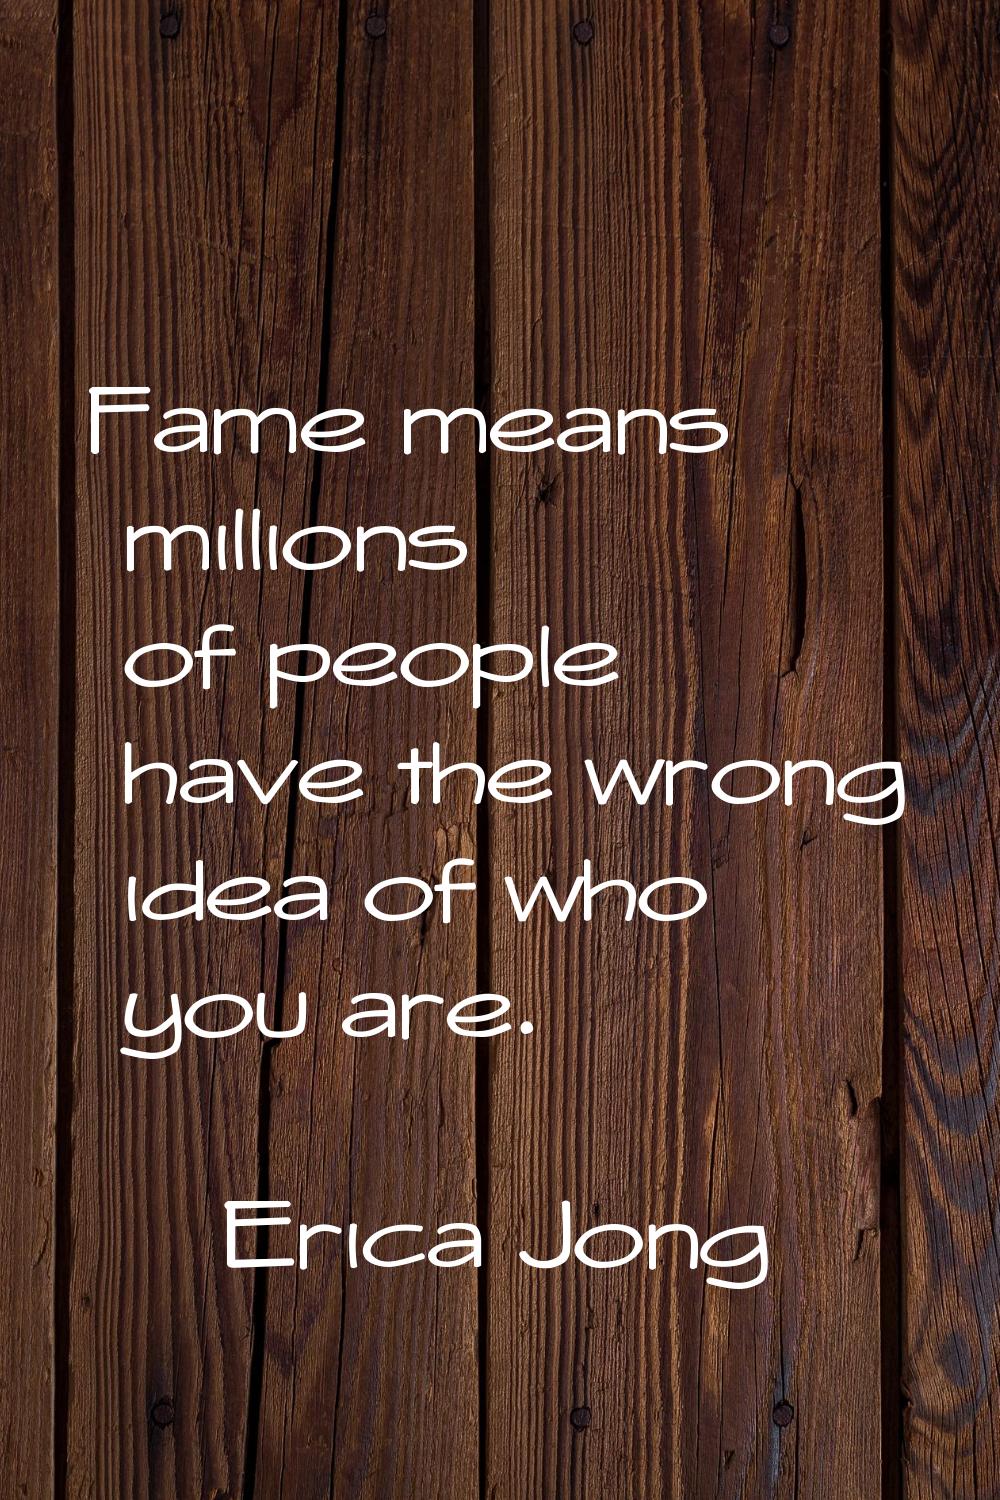 Fame means millions of people have the wrong idea of who you are.